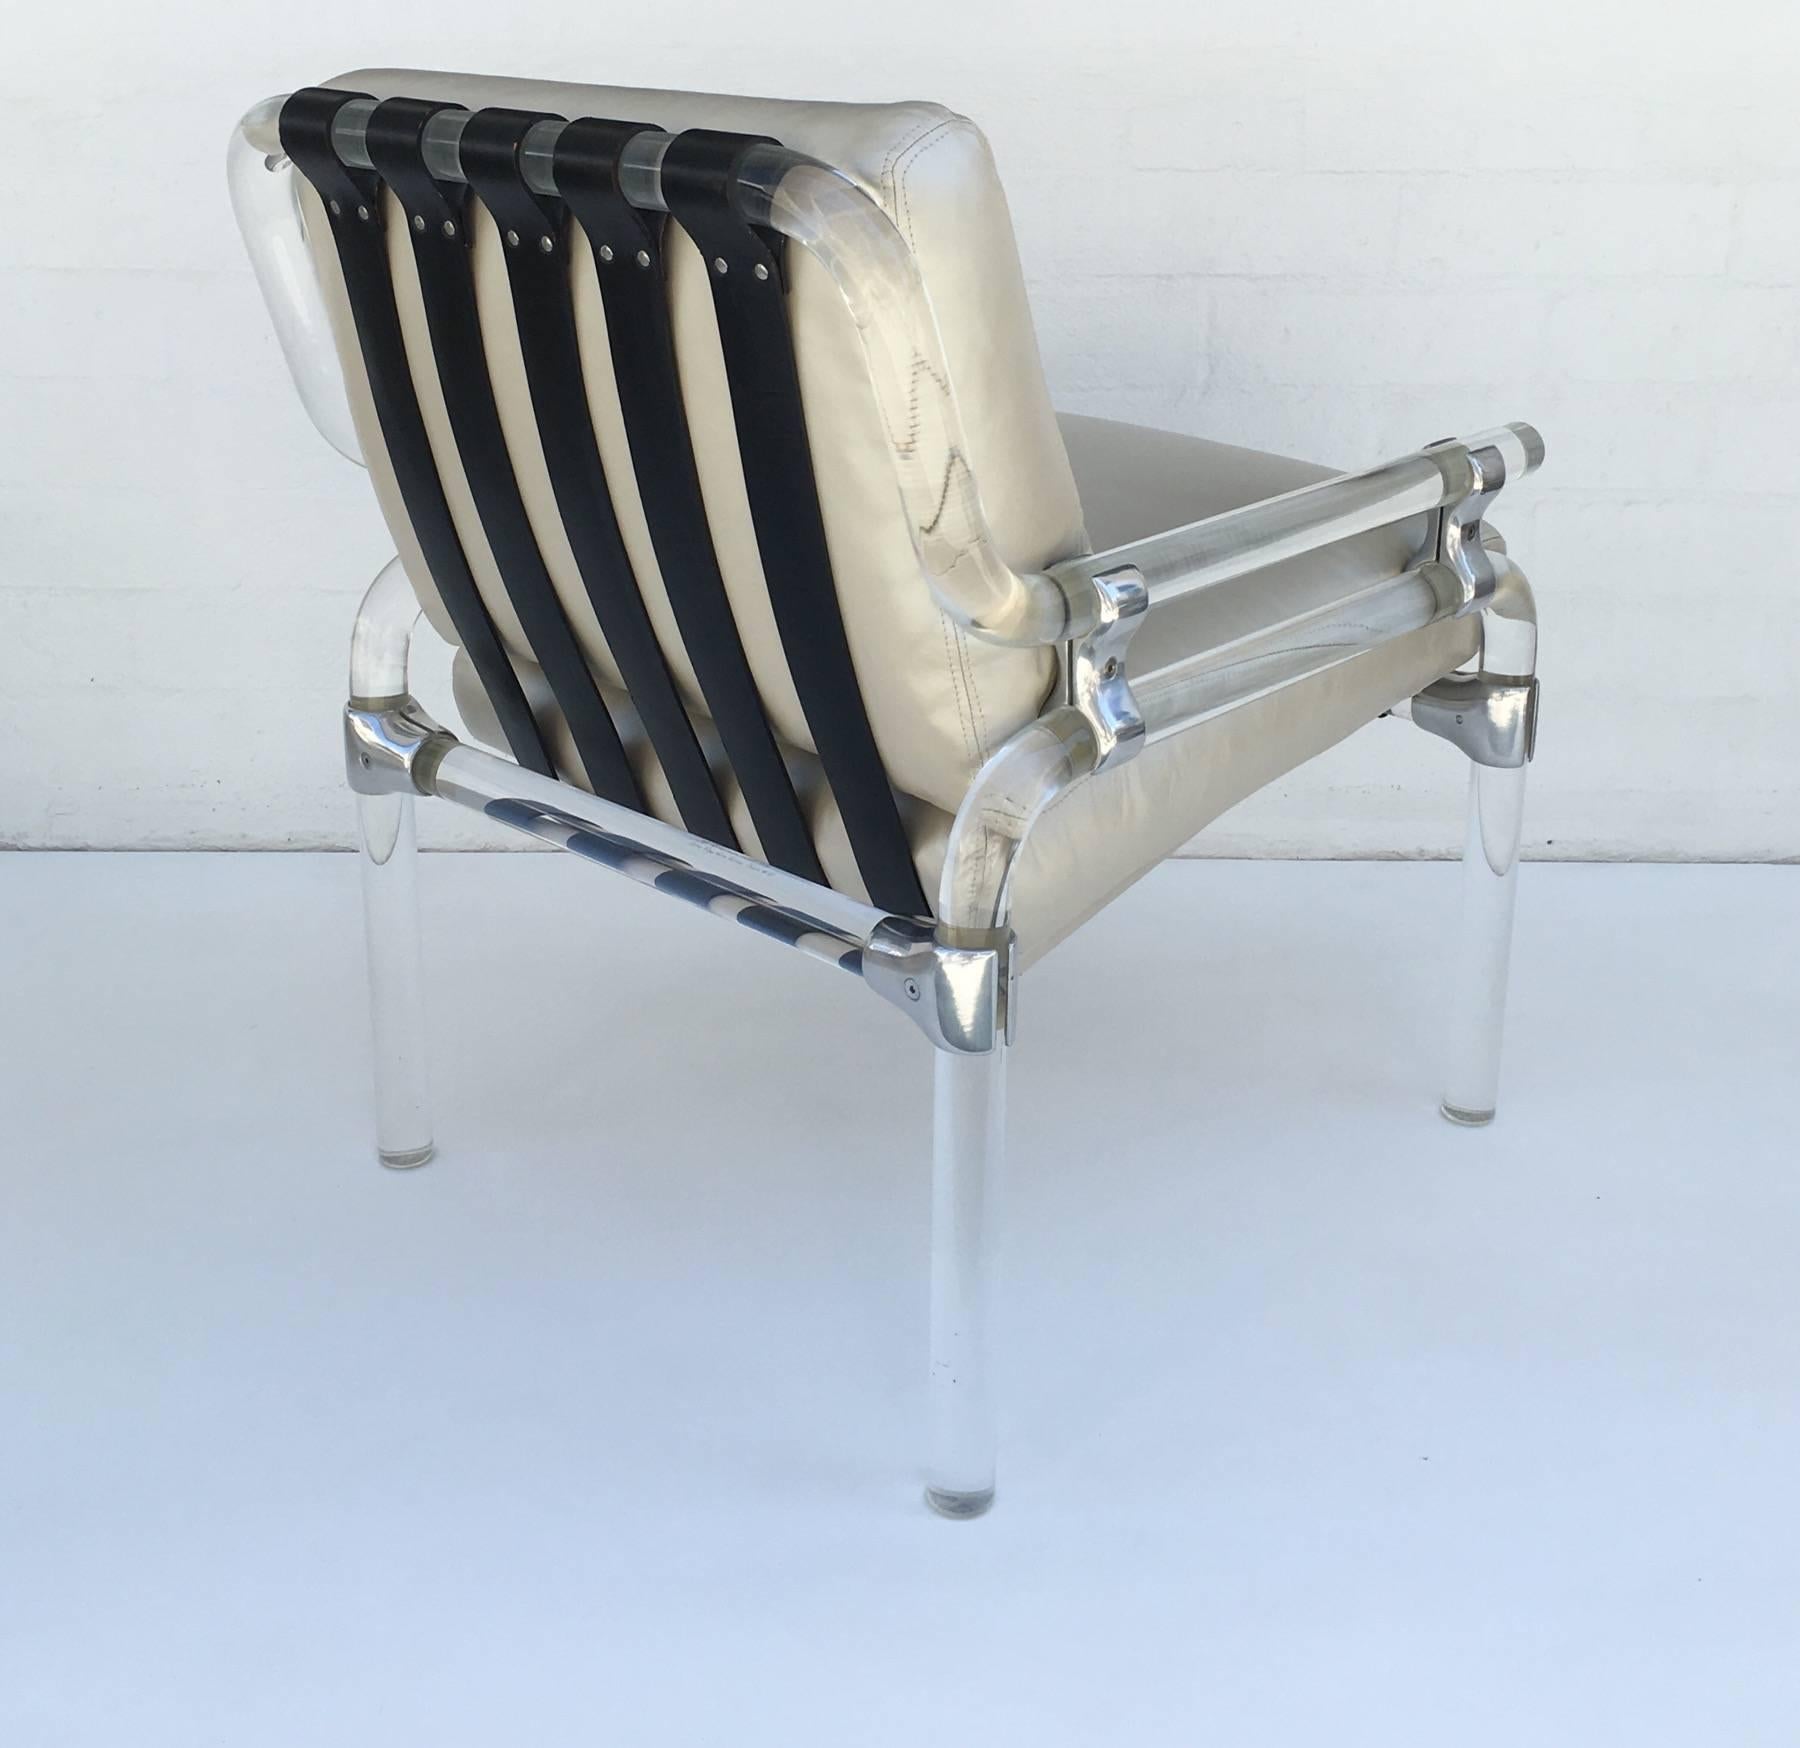 A glamorous acrylic and leather lounge chair designed by Jeff Messerschmidt in 1974 from the 1000 pipe line series chair #61. 
Constructed of thick acrylic pipe connected by polished aluminum brackets, thick black leather straps hold the newl